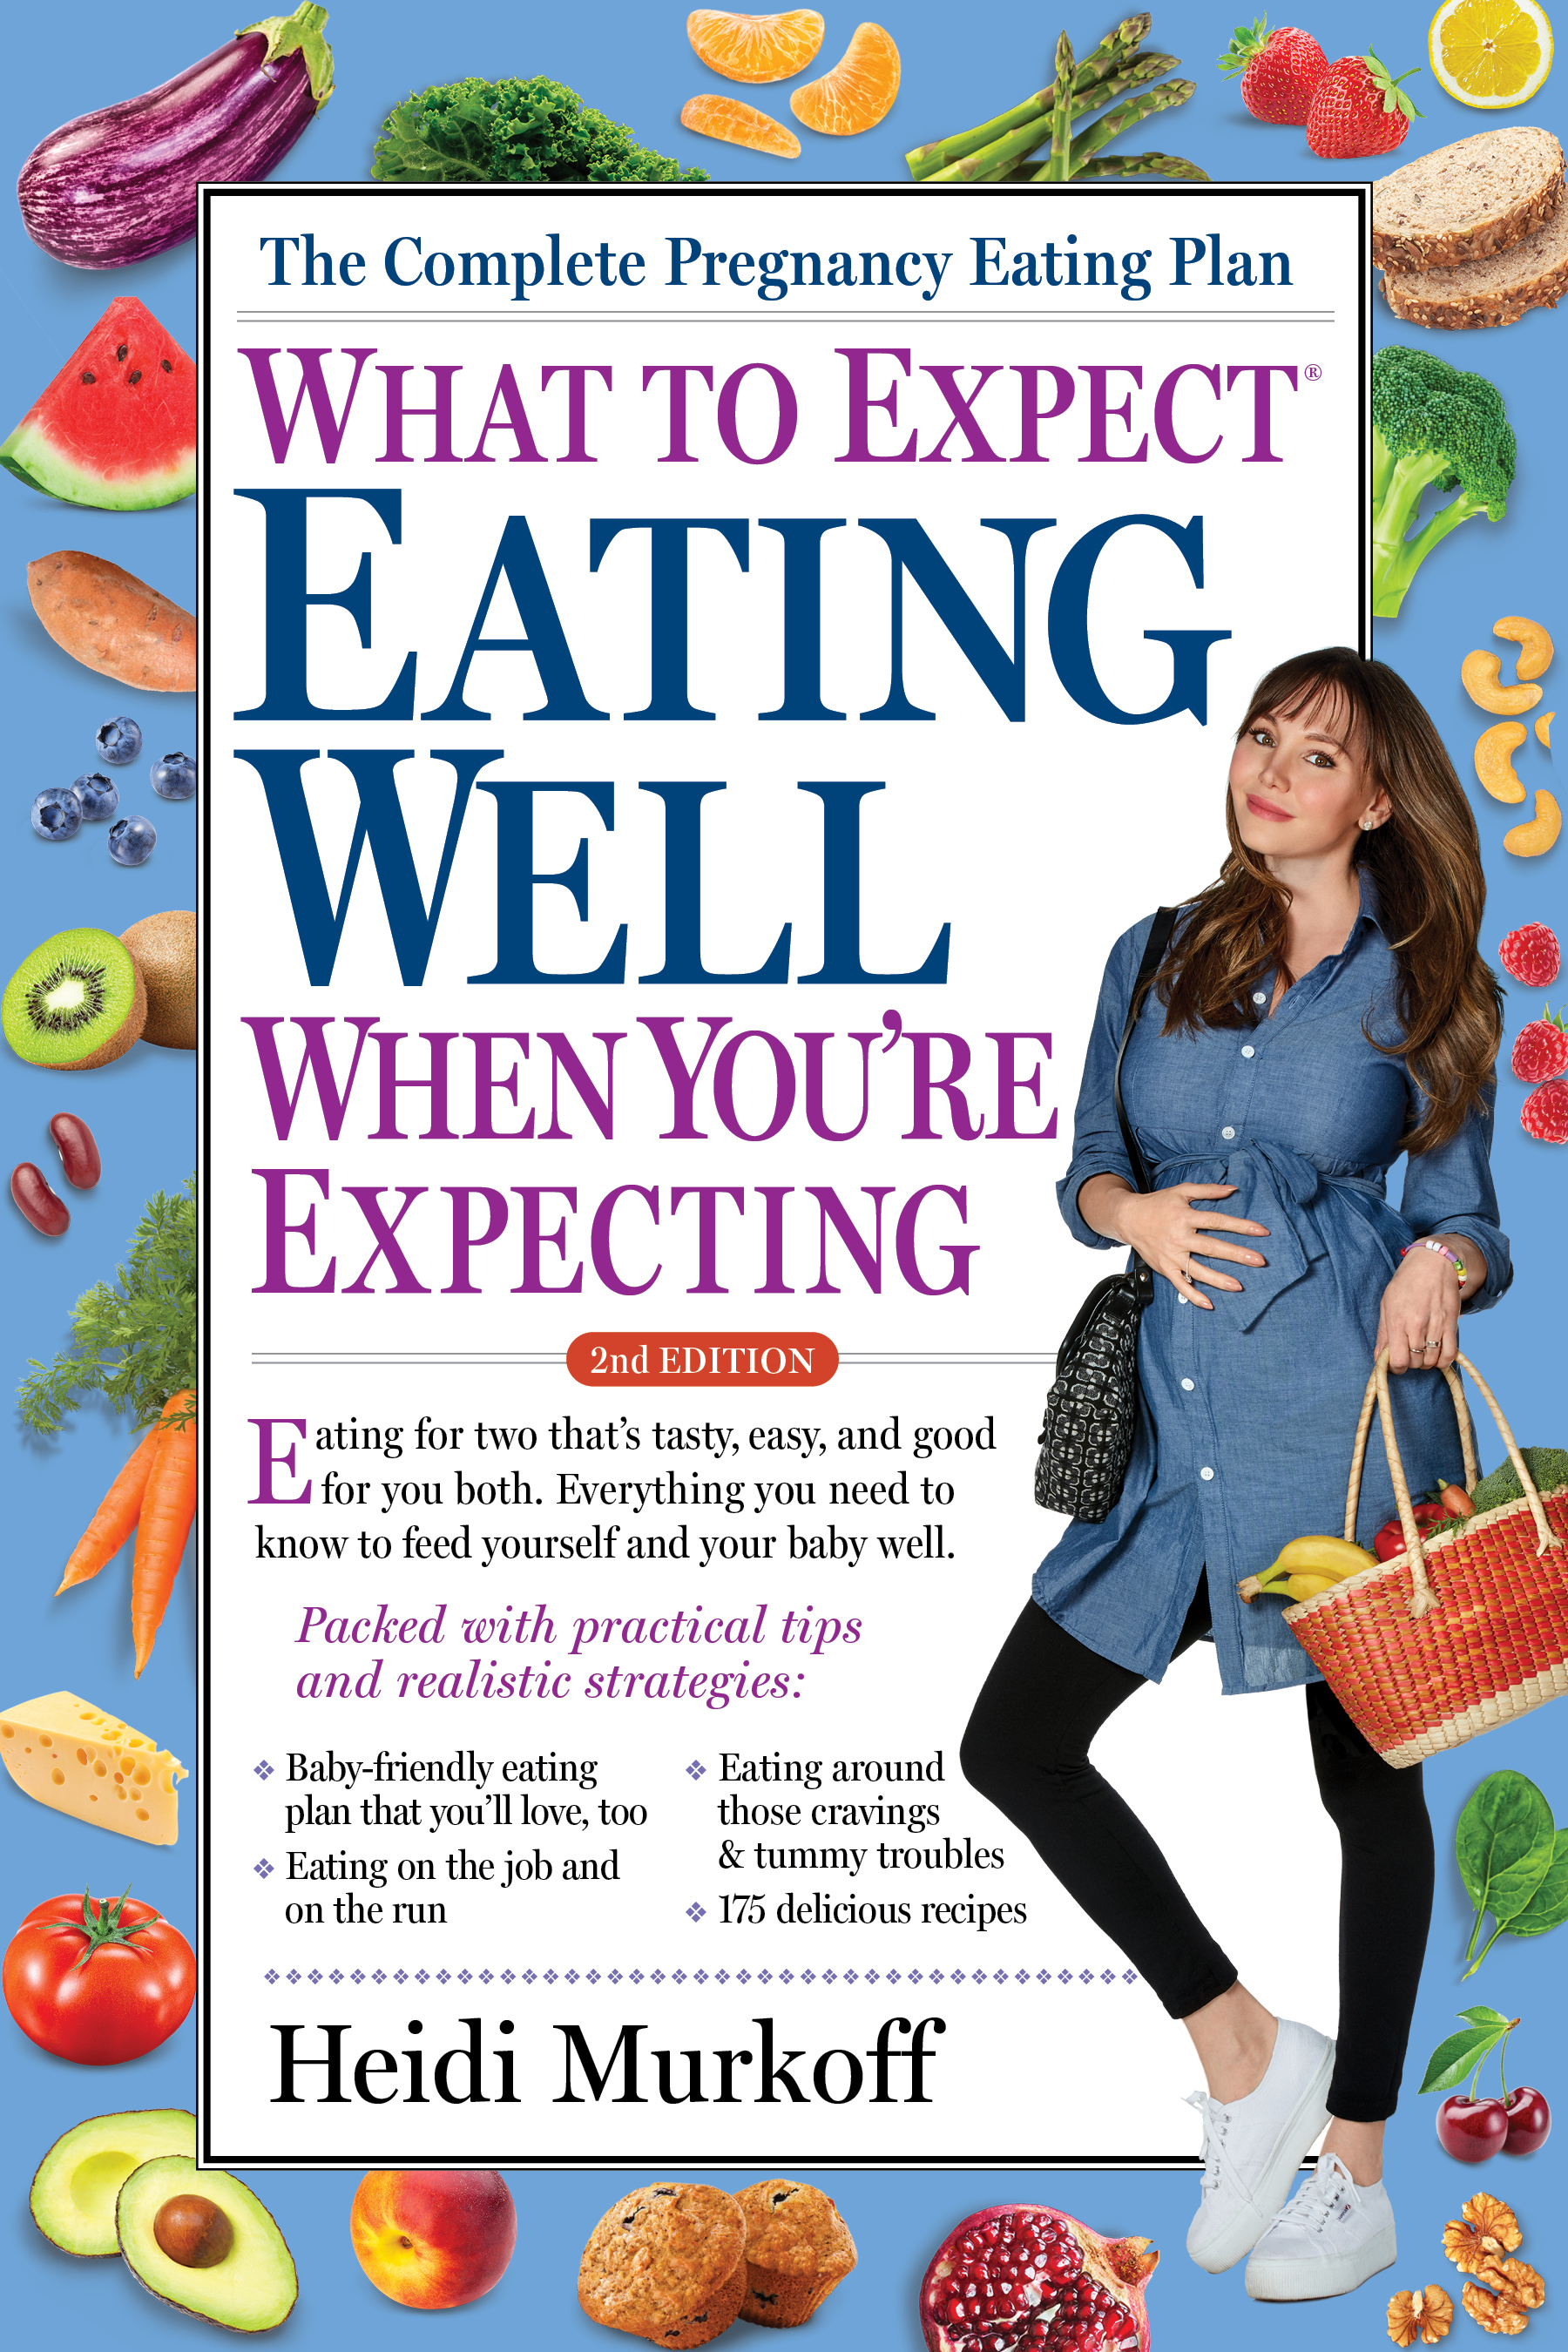 What to expect eating well when you're expecting cover image